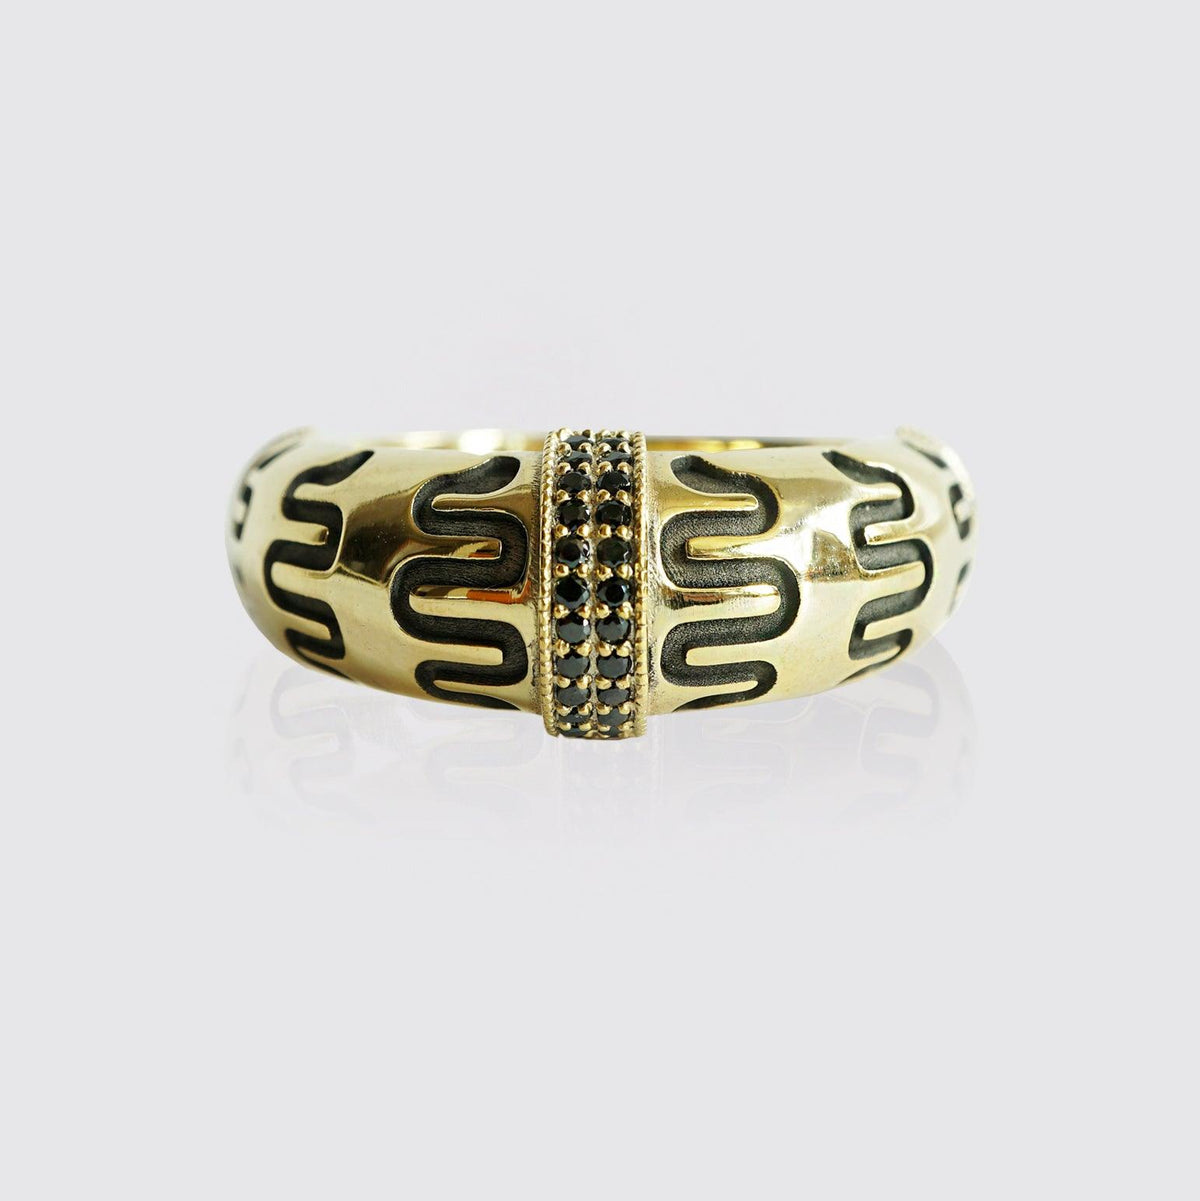 Maze Black Diamond Ring in Sterling Silver and 14K Gold, 9mm - Tippy Taste Jewelry